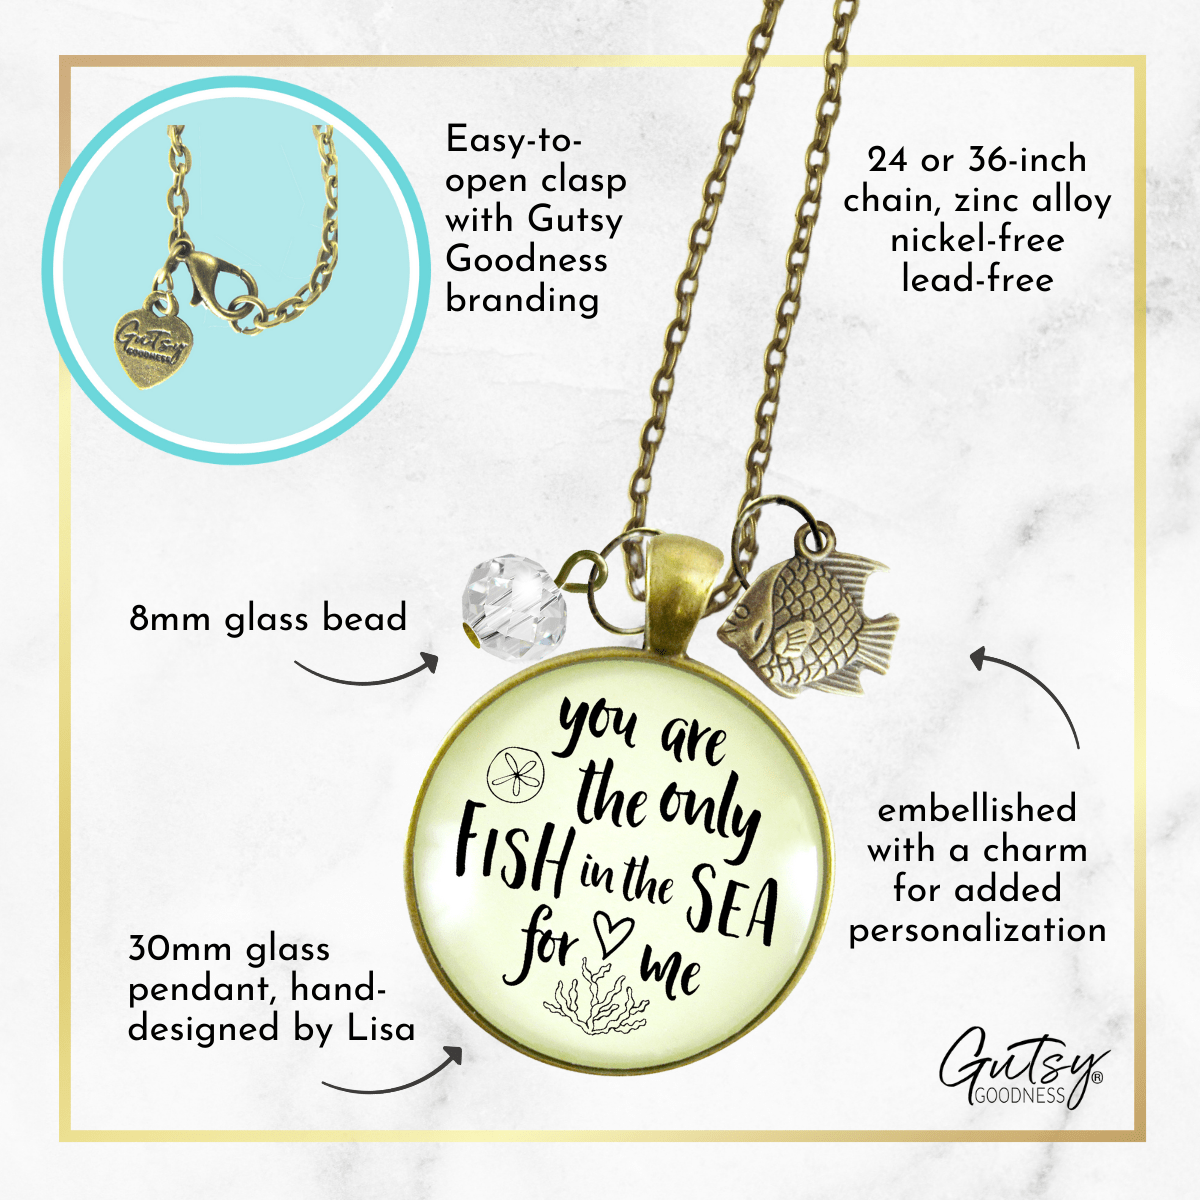 Gutsy Goodness Romantic Beach Necklace You are Only Fish in Sea Love Quote Turtle - Gutsy Goodness Handmade Jewelry;Romantic Beach Necklace You Are Only Fish In Sea Love Quote Turtle - Gutsy Goodness Handmade Jewelry Gifts